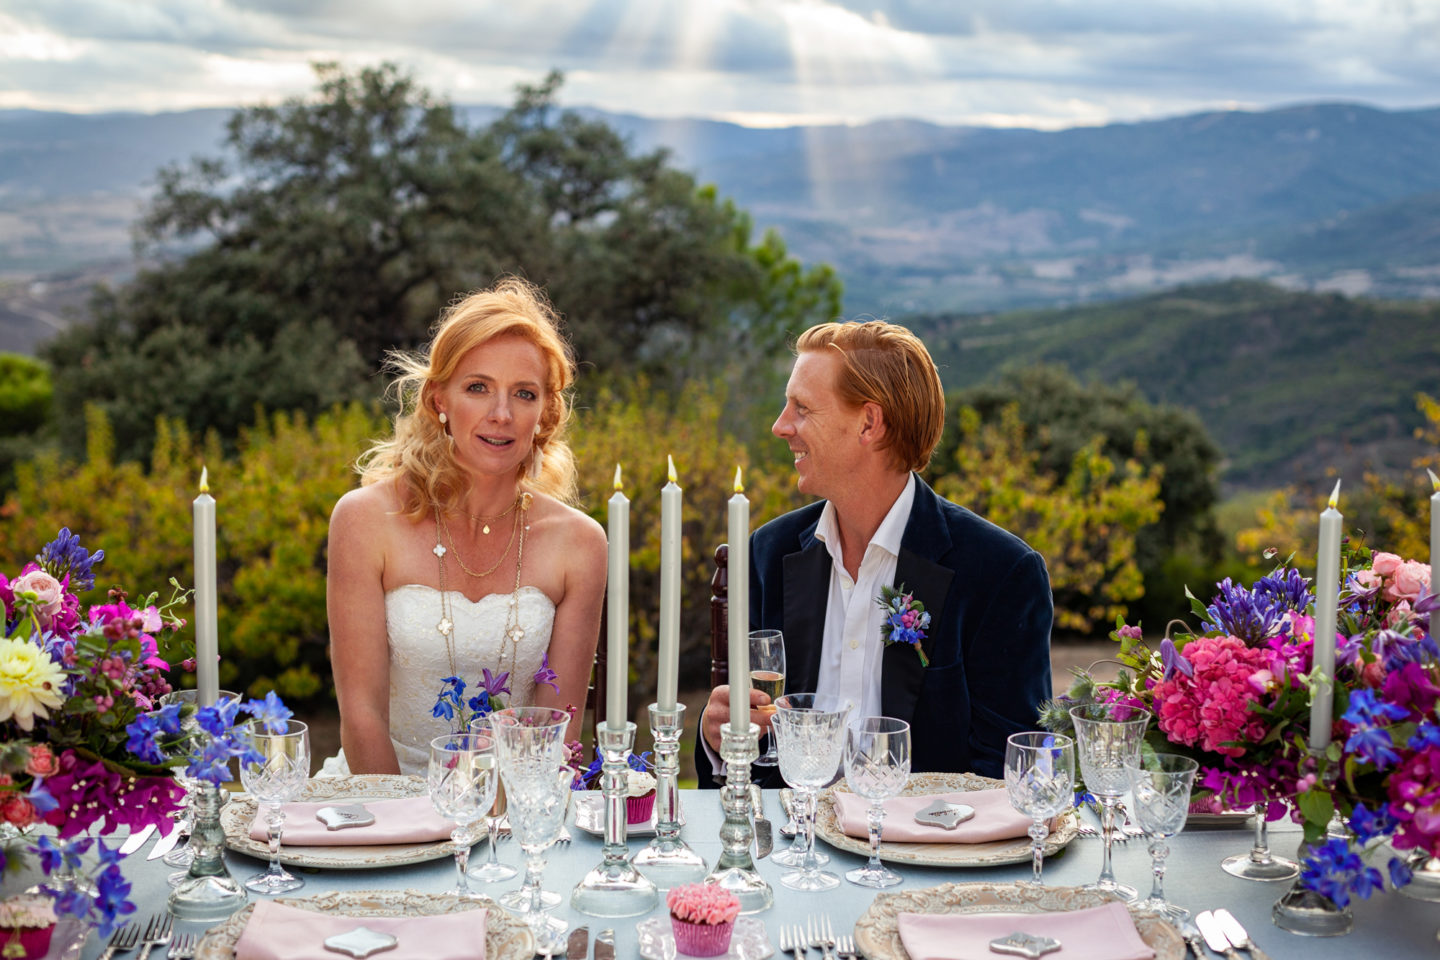 10 Top Tips For Planning A Quick Destination Wedding